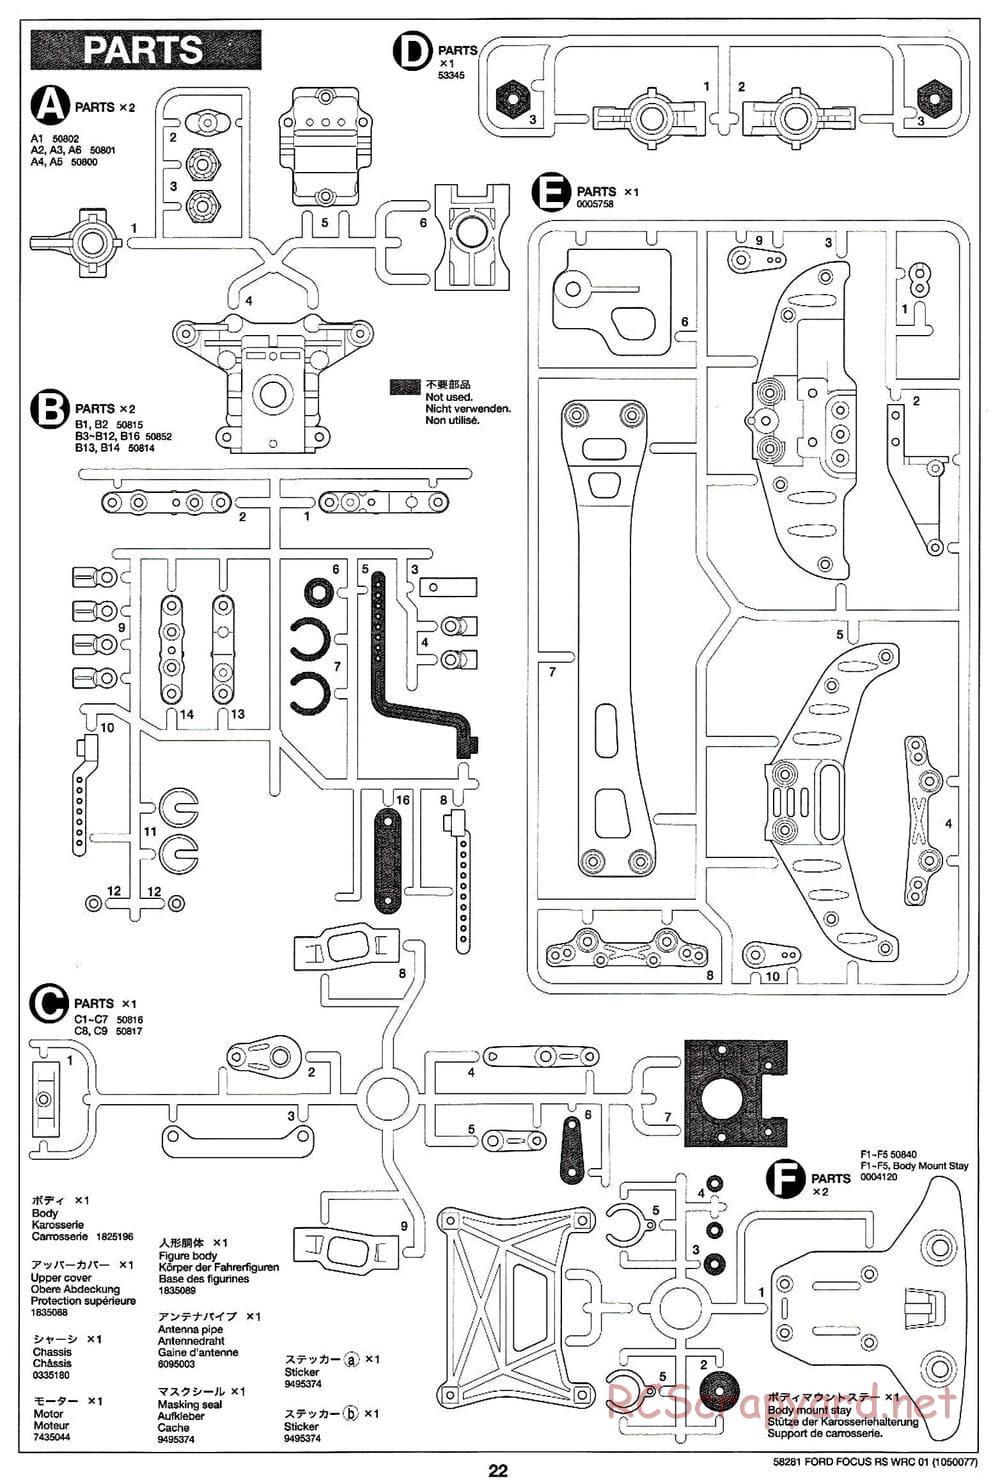 Tamiya - Ford Focus RS WRC 01 - TB-01 Chassis - Manual - Page 22